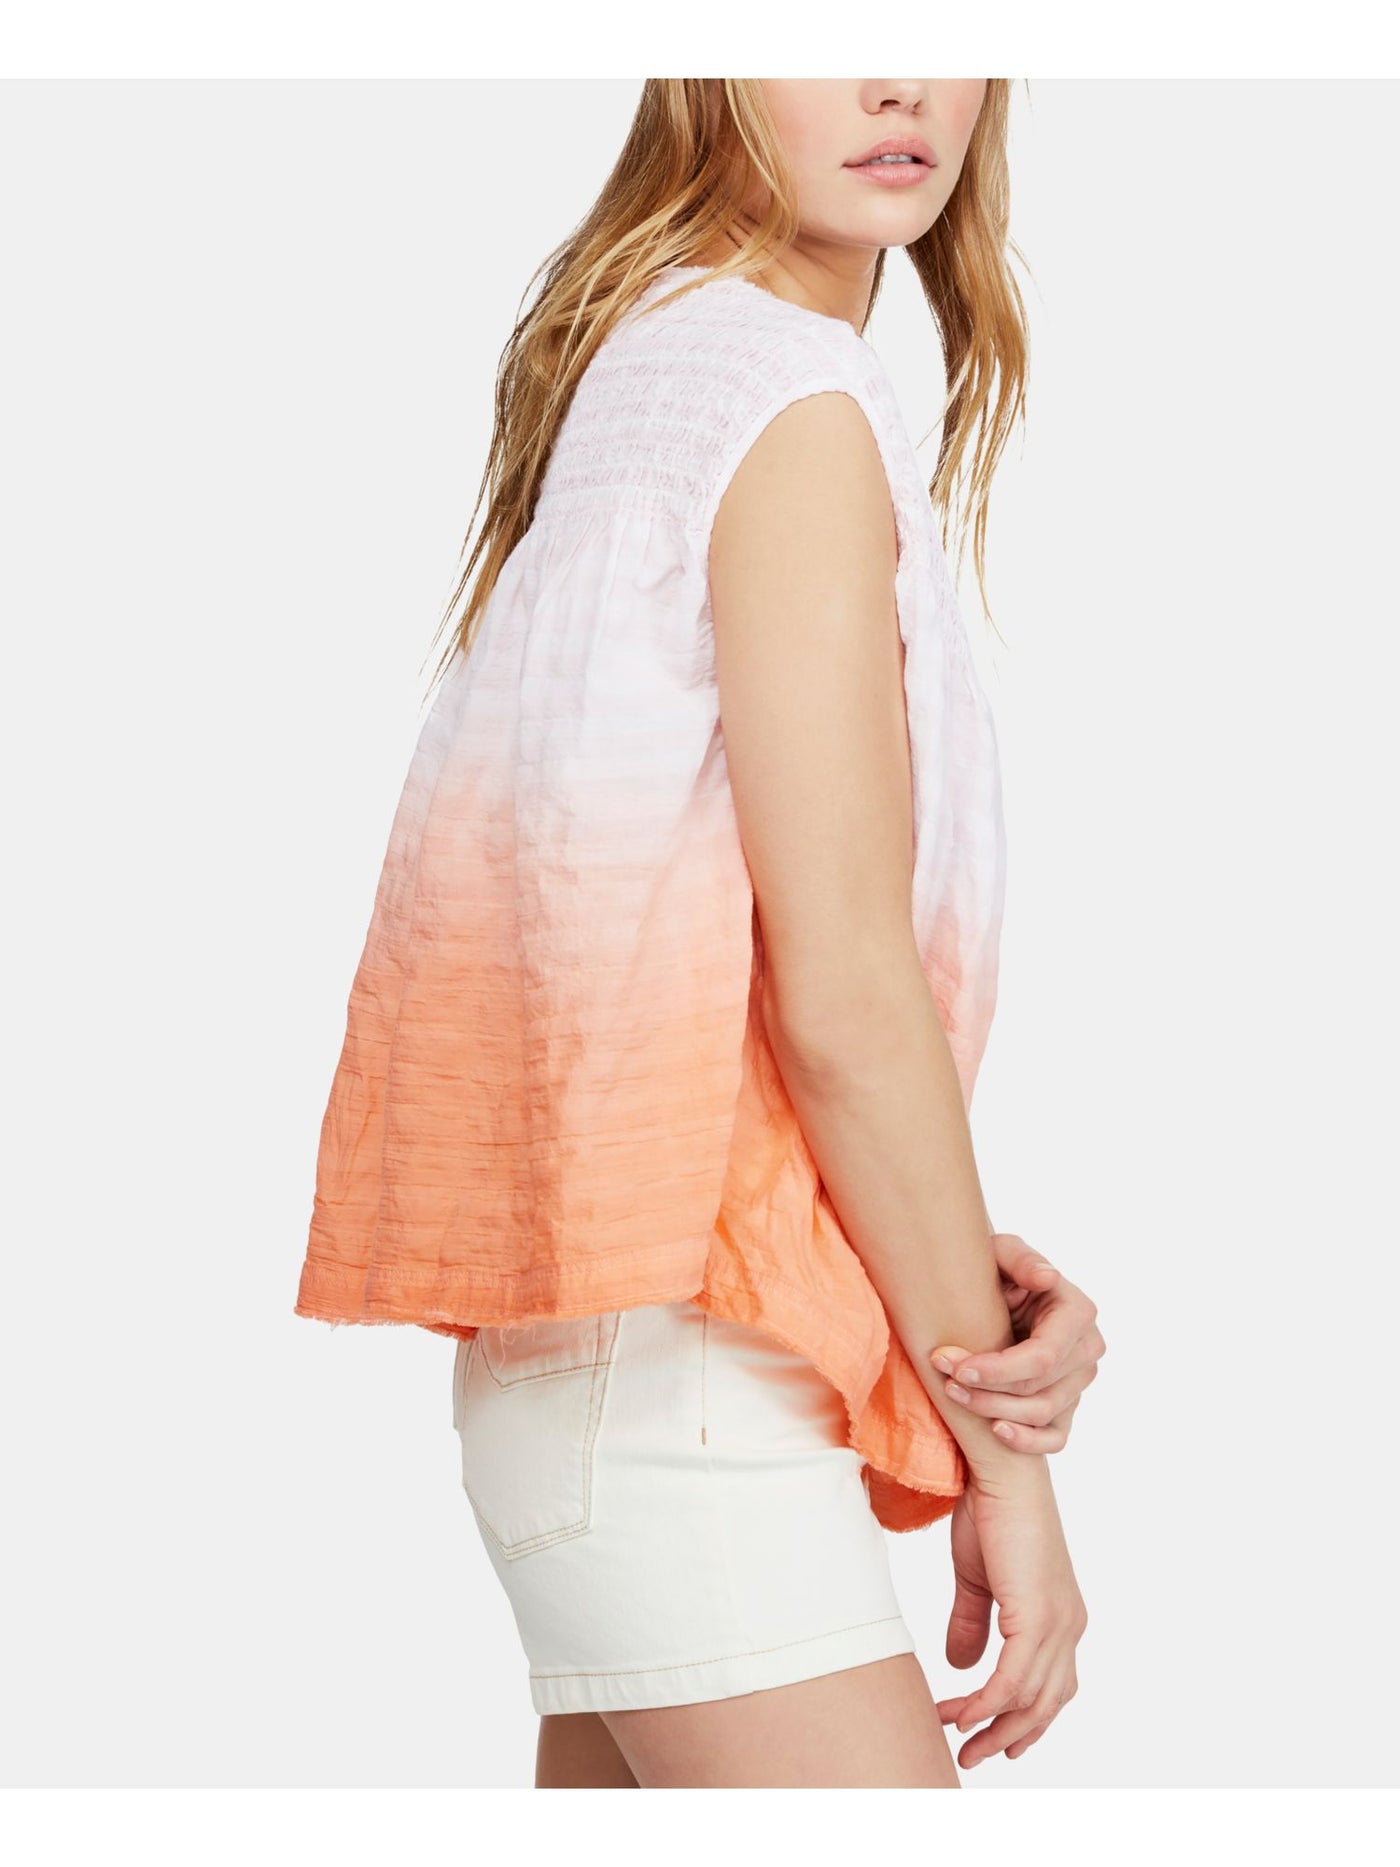 FREE PEOPLE Womens Coral Ruffled Ombre Sleeveless Henley Peasant Top S